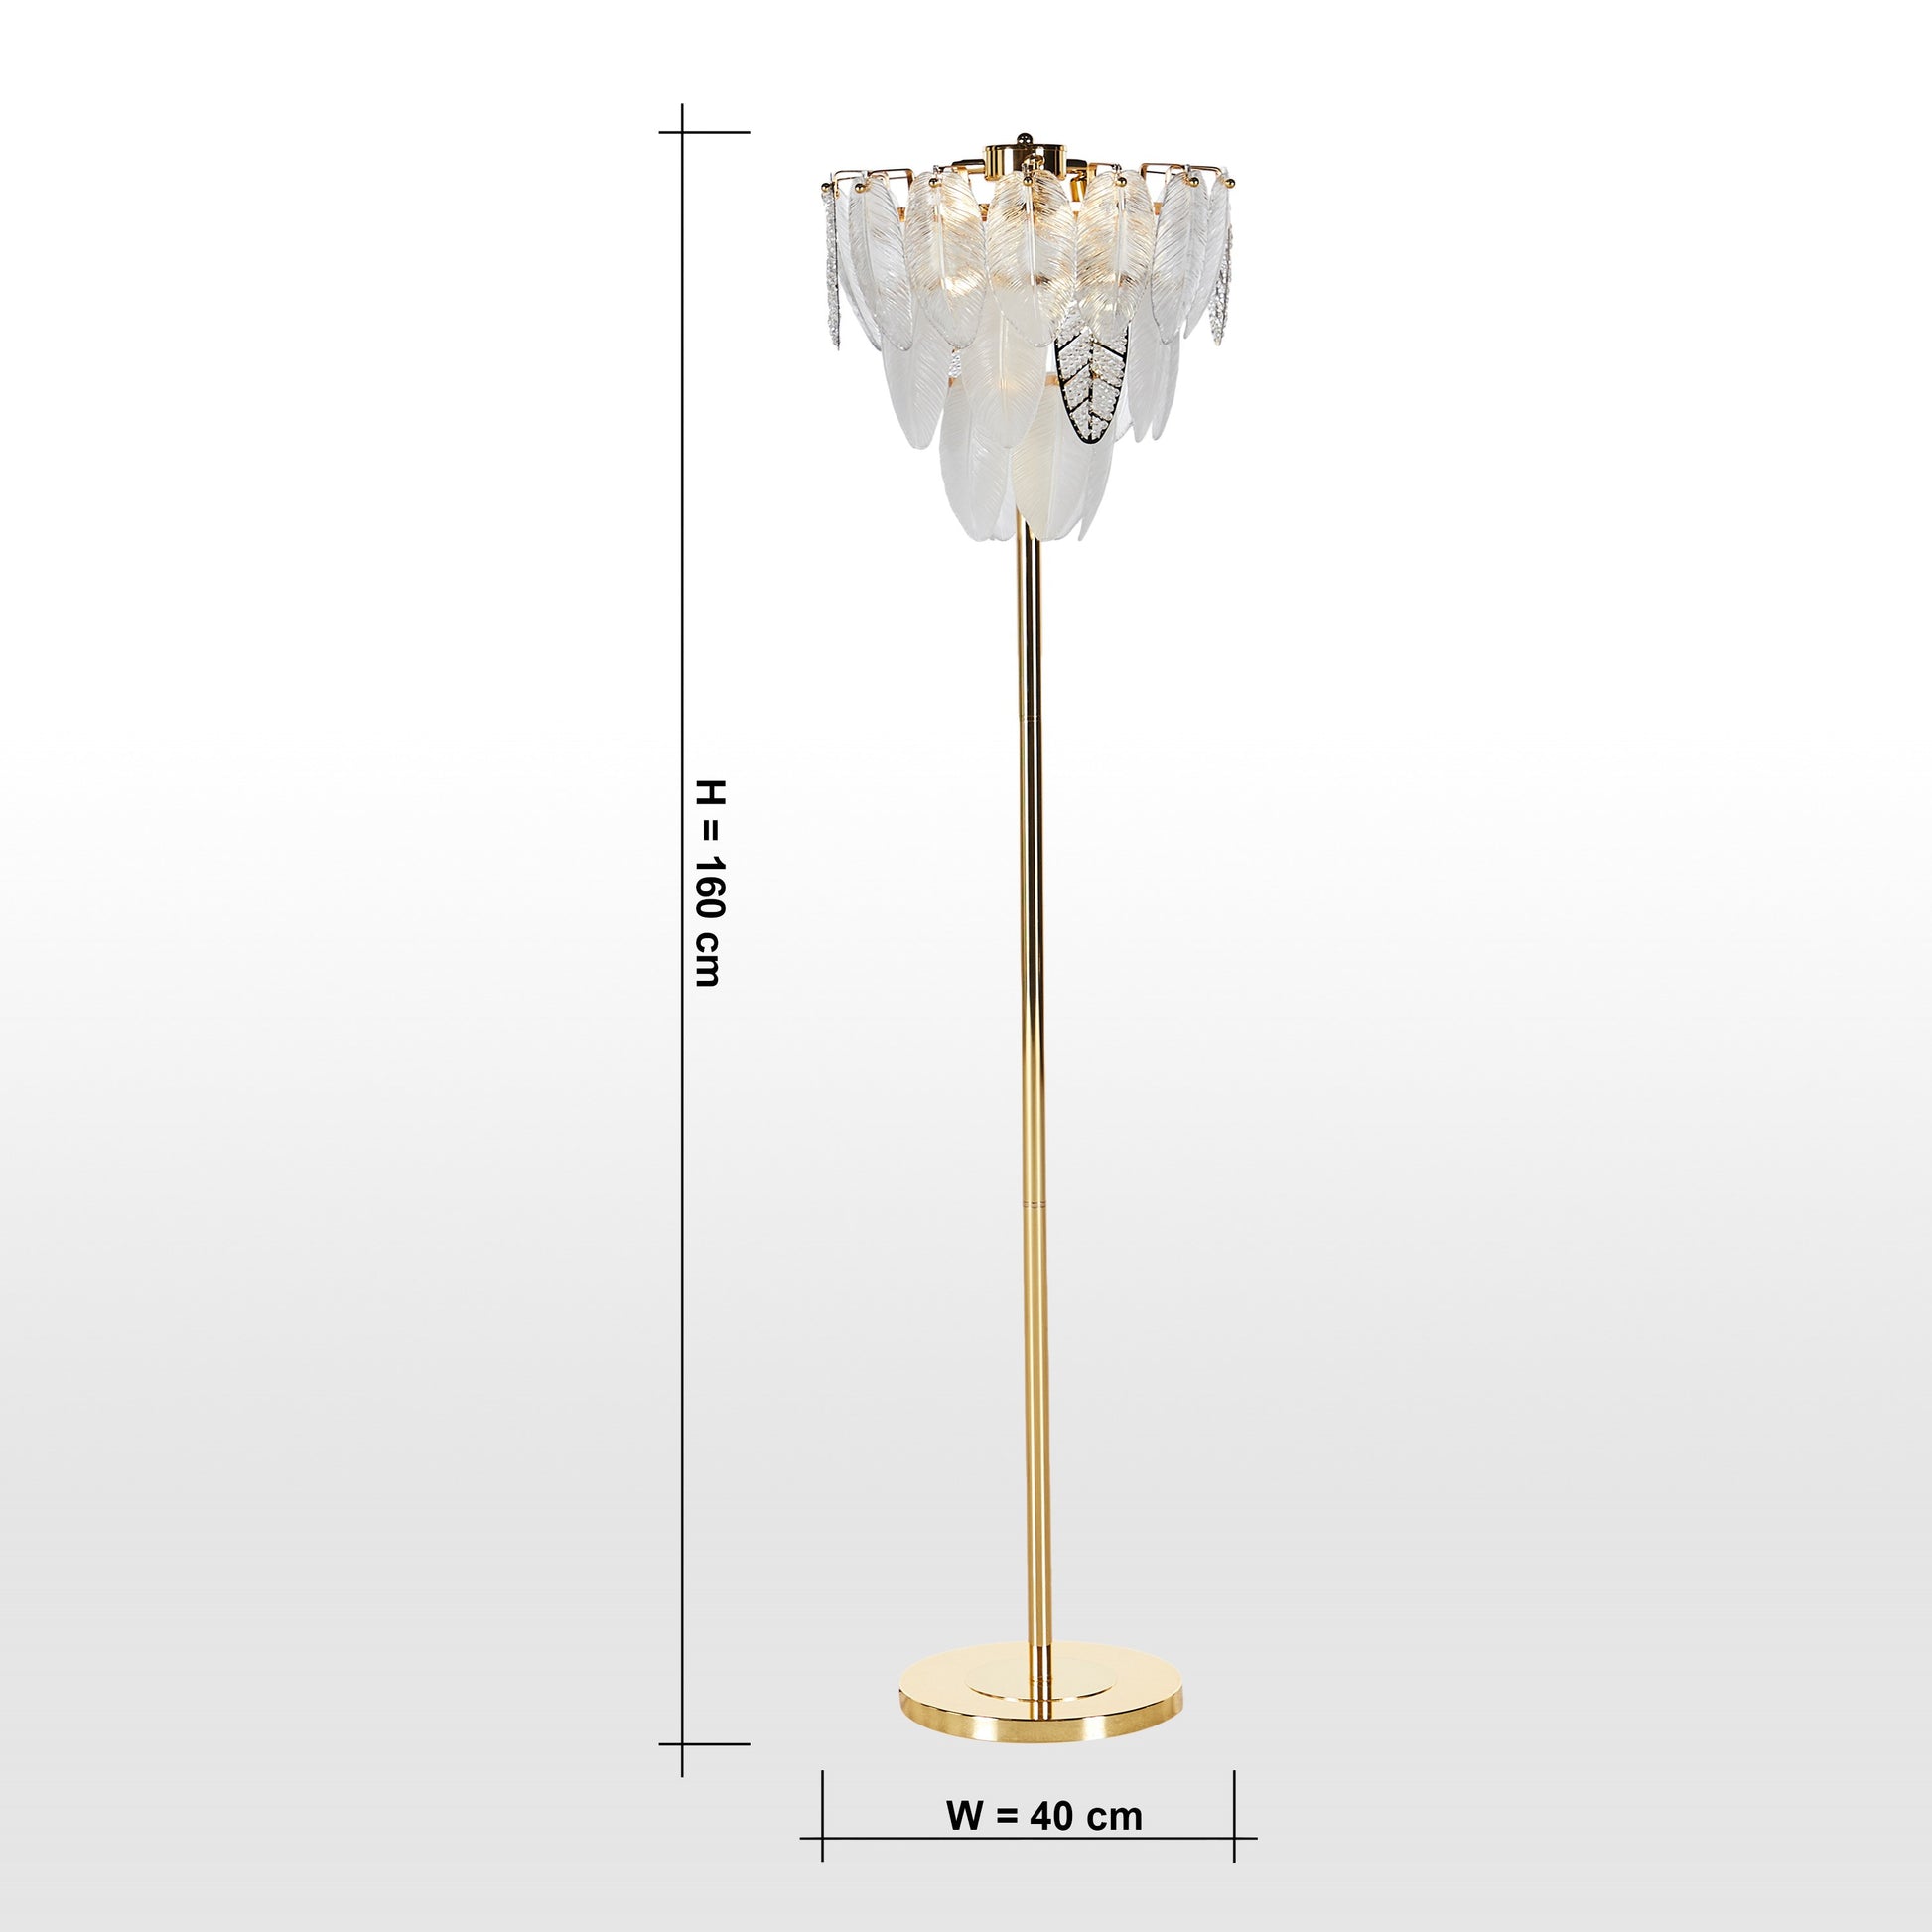 Vintage Charm Feather Crystal Floor Lamp, Shop online home decor, furniture, sofa, bed sheet, baby product, pet products, lamp, lights, deco items, decoration, cute home decor, best online shopping, uae, dubai, sharjah, home furniture cheap ssolution, onl